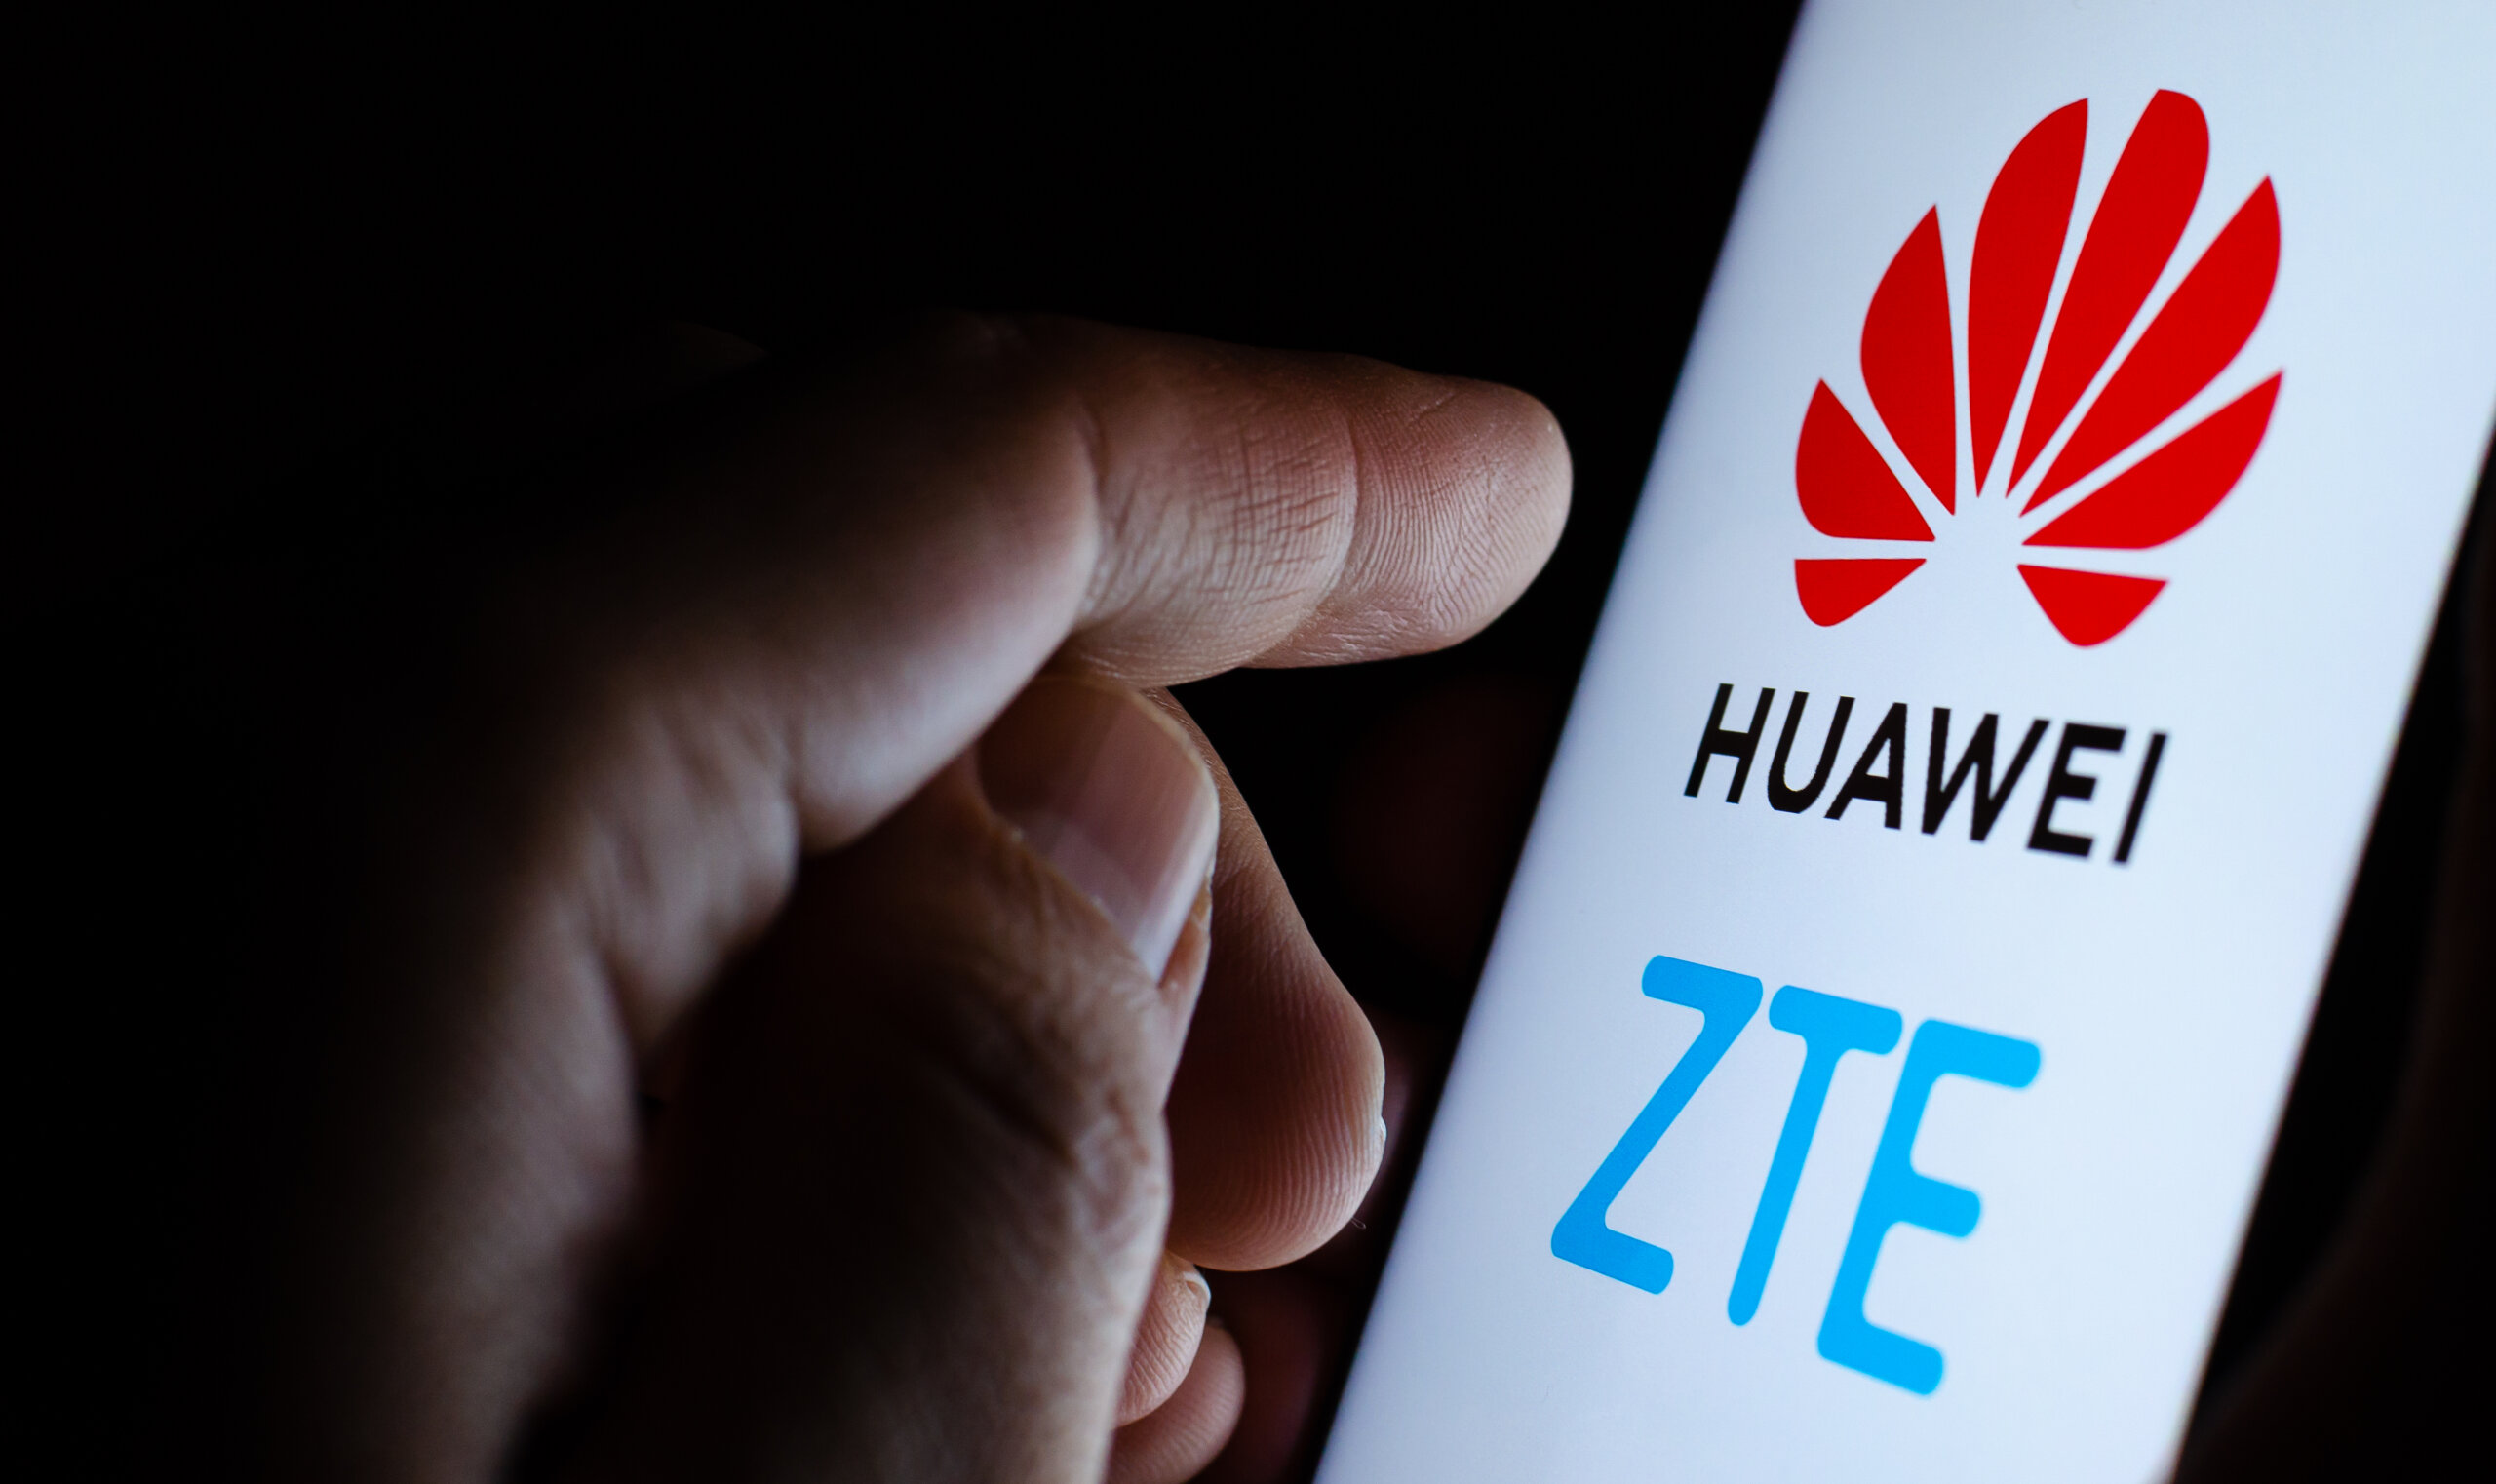 Germany is getting ready to wean off their dependence on Huawei and ZTE